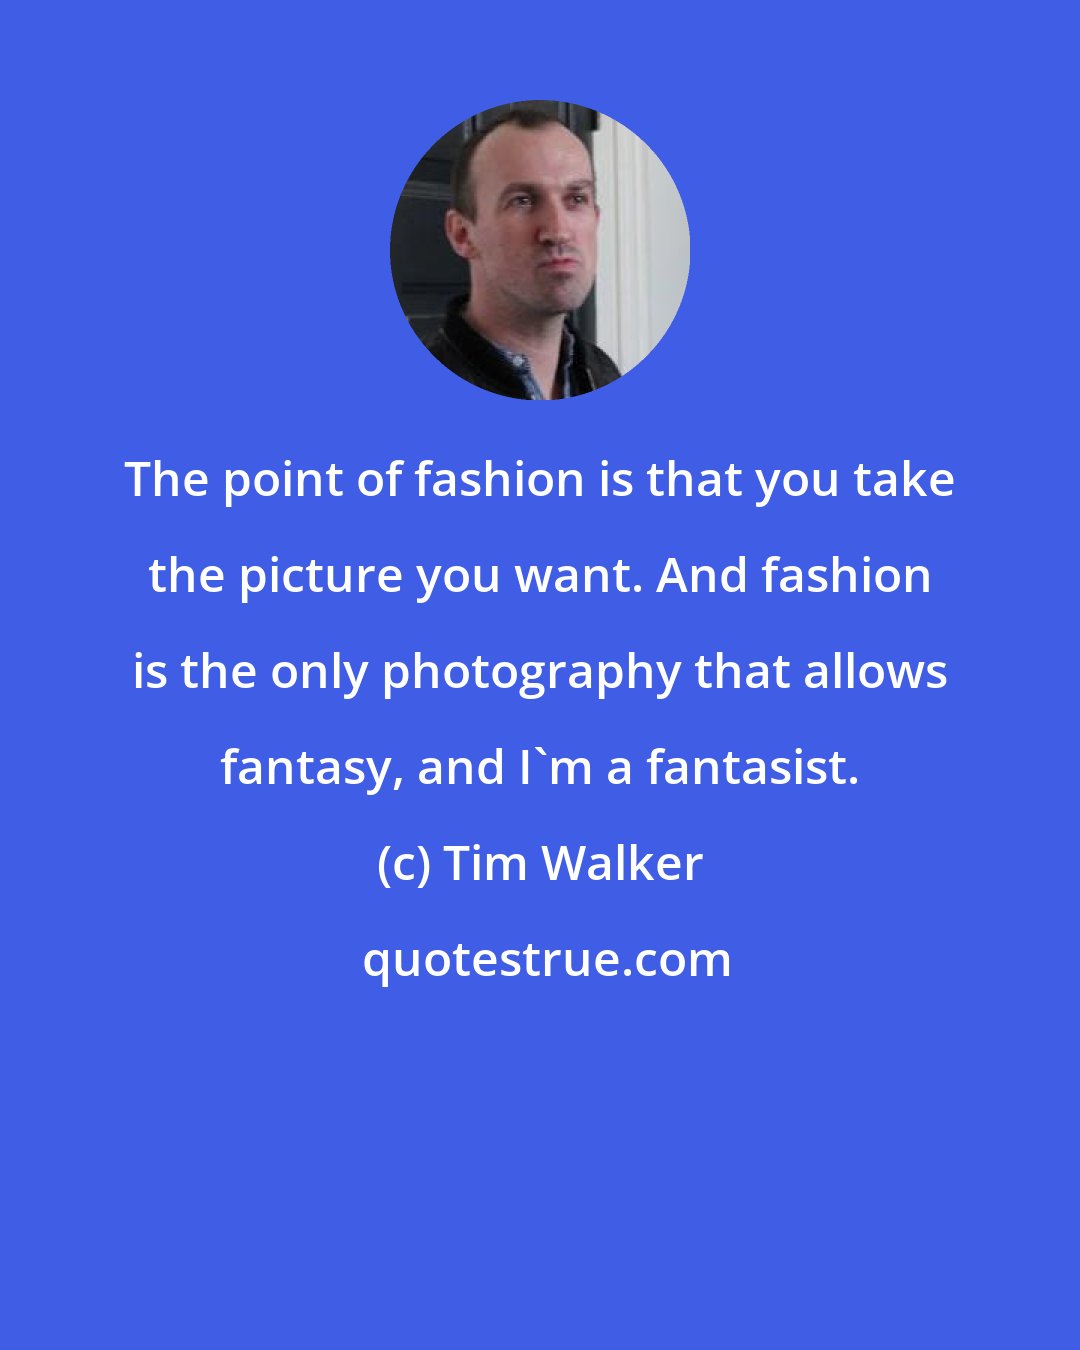 Tim Walker: The point of fashion is that you take the picture you want. And fashion is the only photography that allows fantasy, and I'm a fantasist.